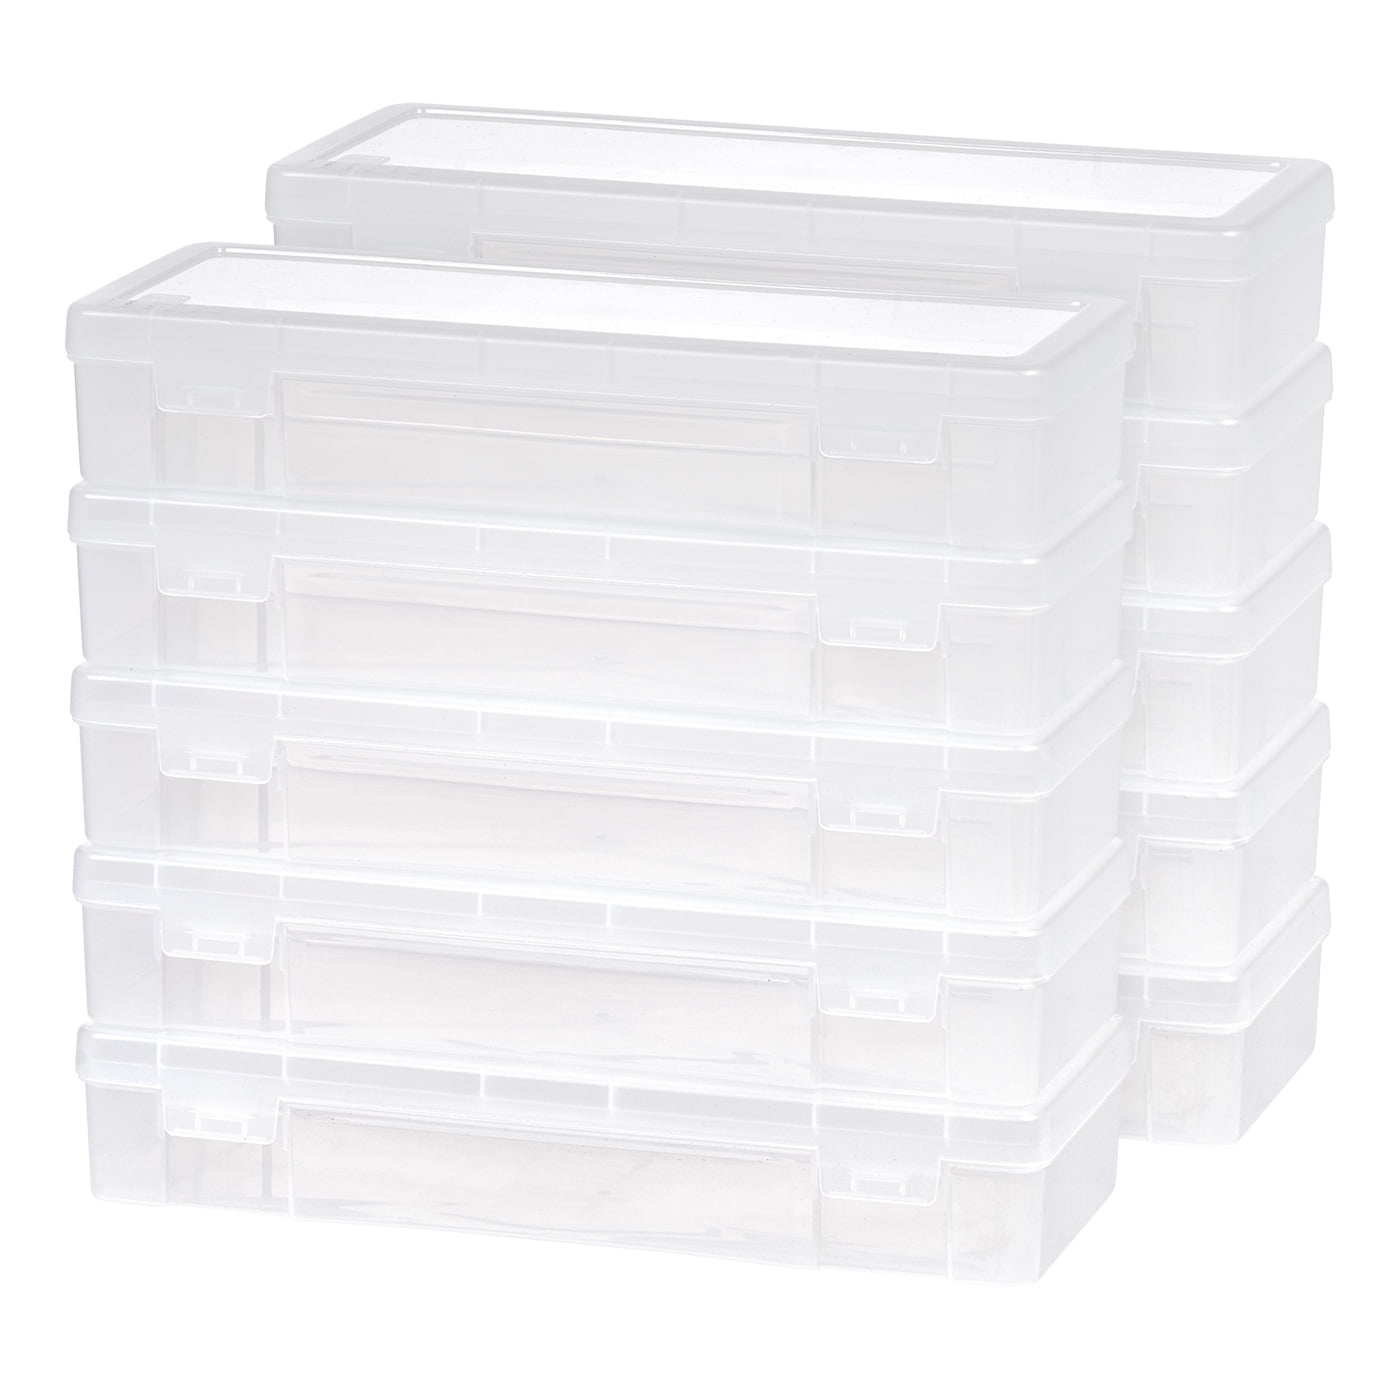  IRIS USA 10 Pack Small Plastic Hobby Art Craft Supply Organizer  Storage Containers with Latching Lid, for Pencil, Crayon, Ribbons, Wahi  Tape, Beads, Sticker, Yarn, Ornaments, Stackable, Clear : Patio, Lawn